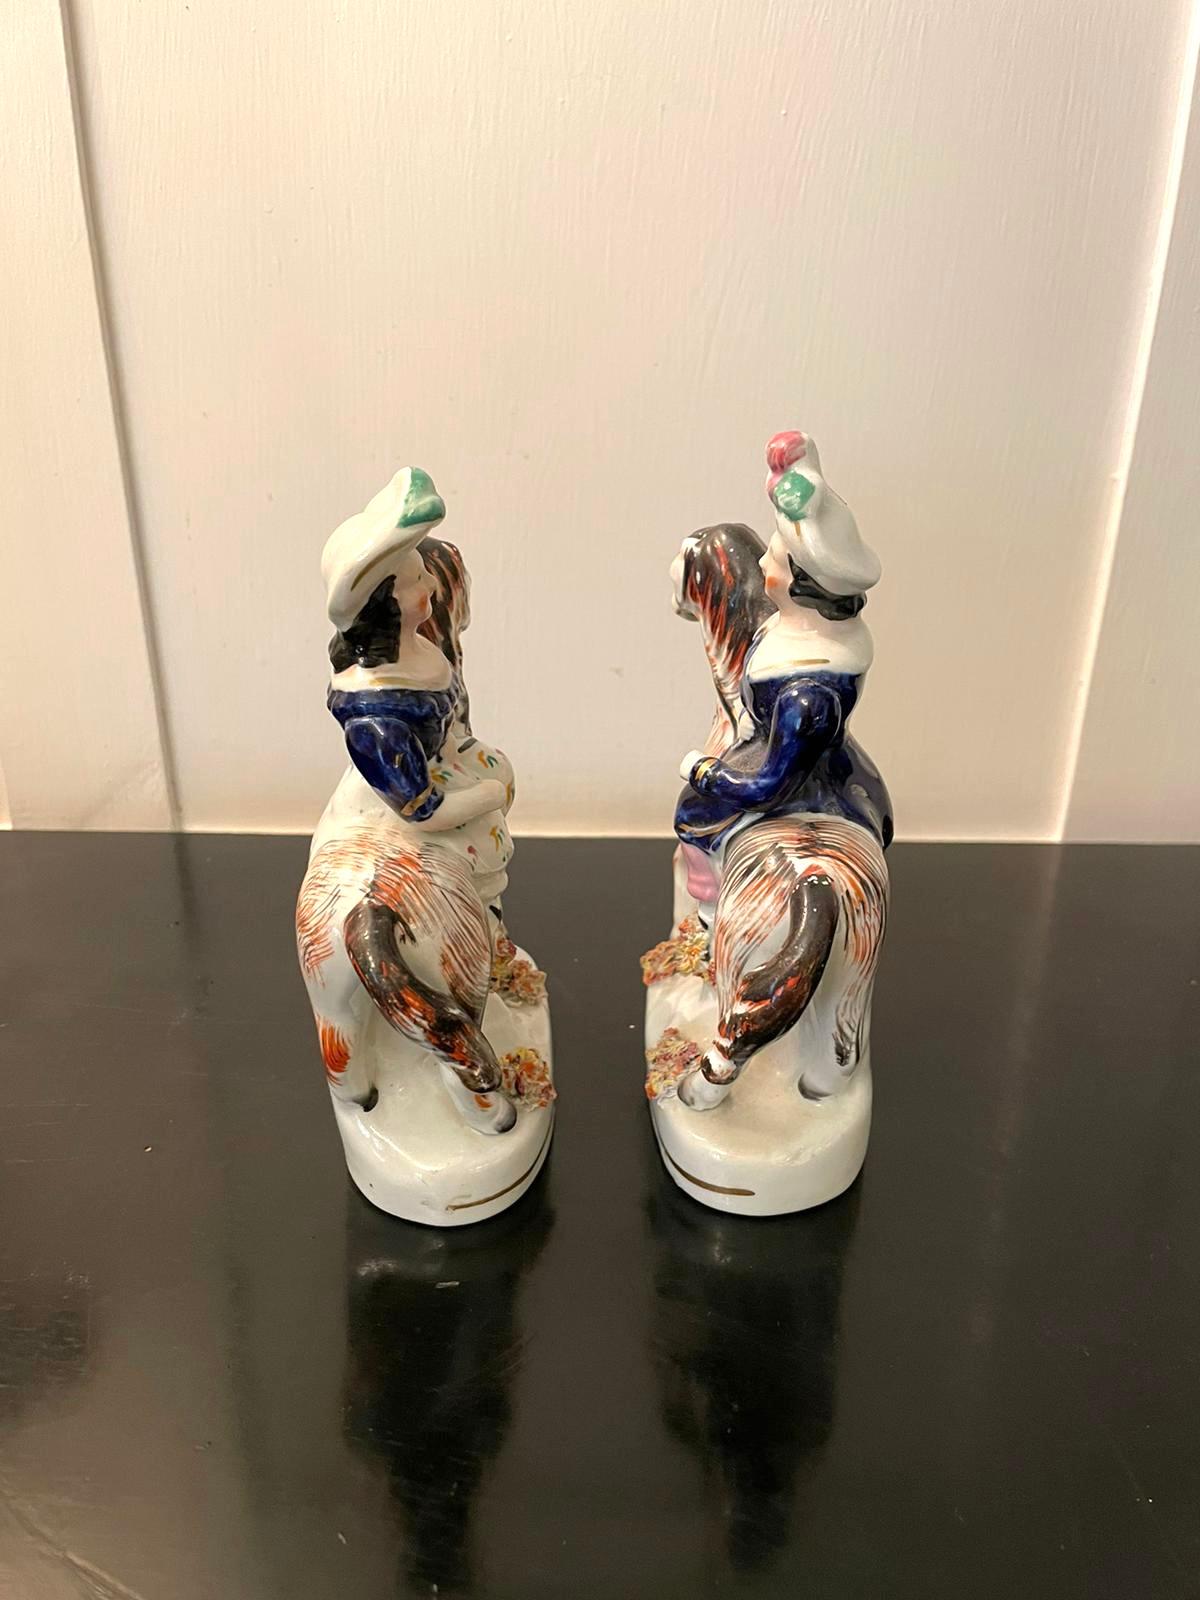 Pair of antique Victorian Staffordshire figures of two ladies in period clothing riding colourful horse’s on oval shaped bases.

In lovely original condition.

Measures: H 15 cm 
W 10 cm 
D 4.5 cm
Date 1880.
 